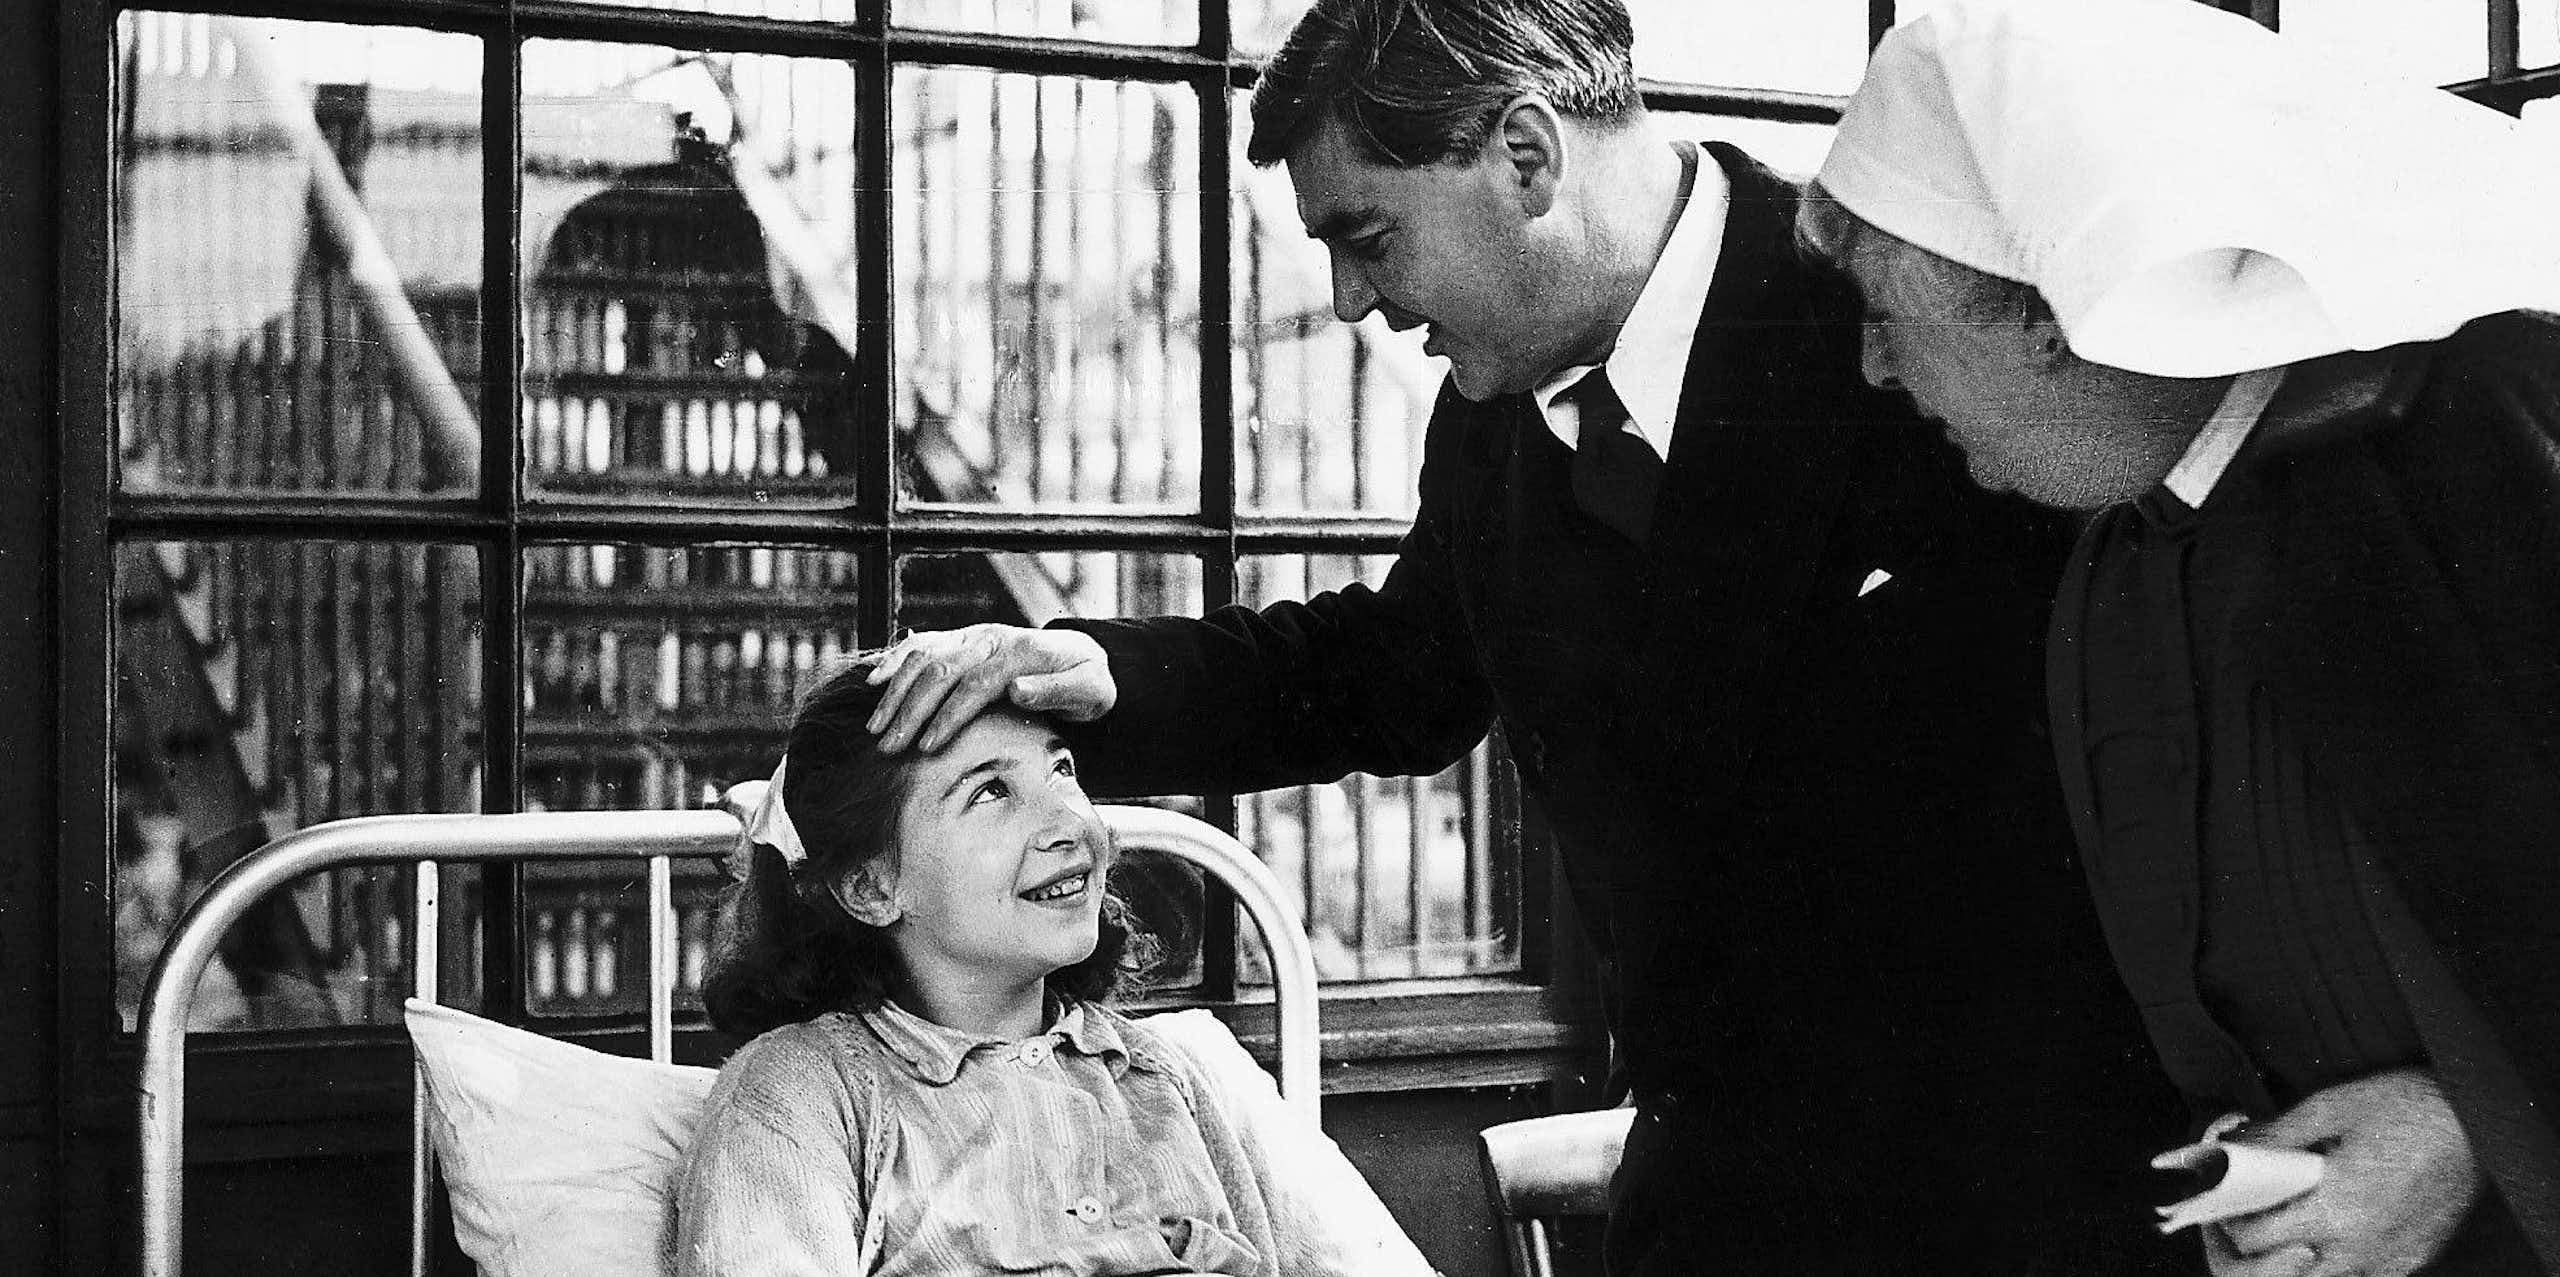 Aneurin Bevan talking to a young female patient